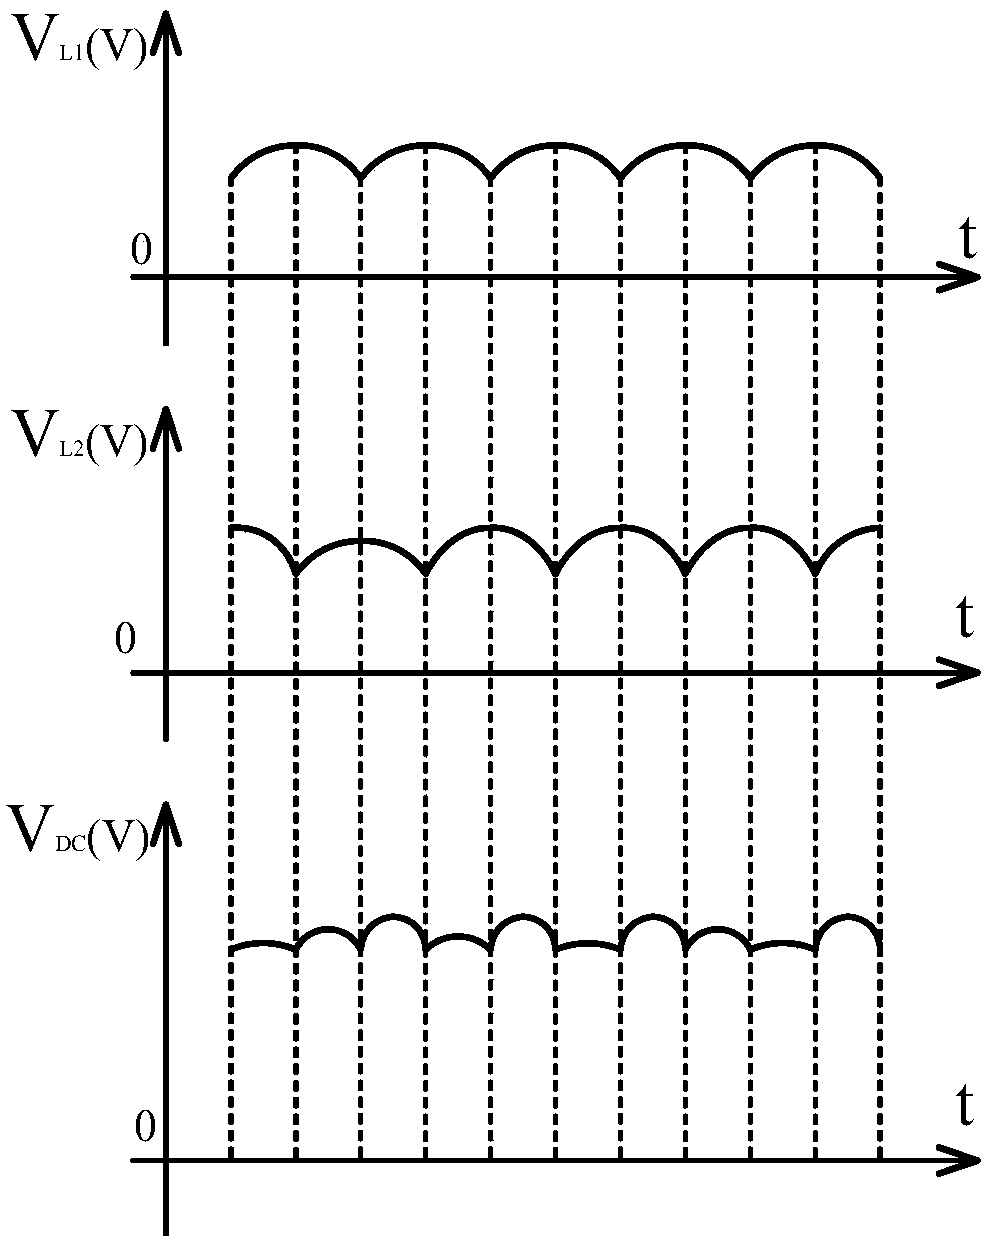 A Frequency Conversion Circuit with Interleaved Mode and Its Deviation Suppression Method